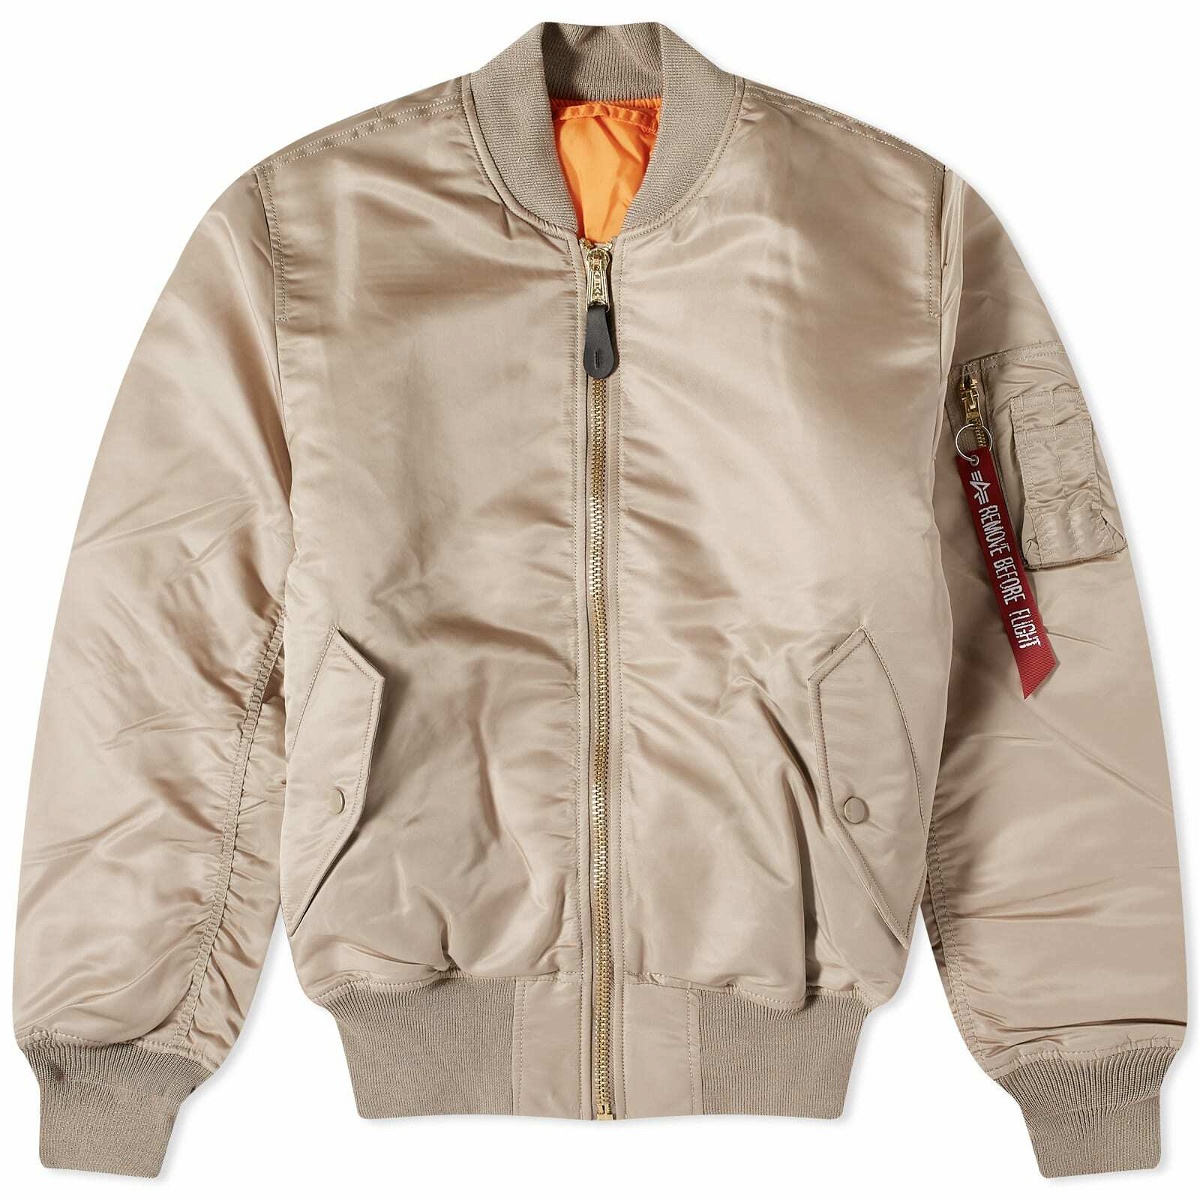 Alpha Industries Men's Classic MA-1 Jacket in Vintage Sand